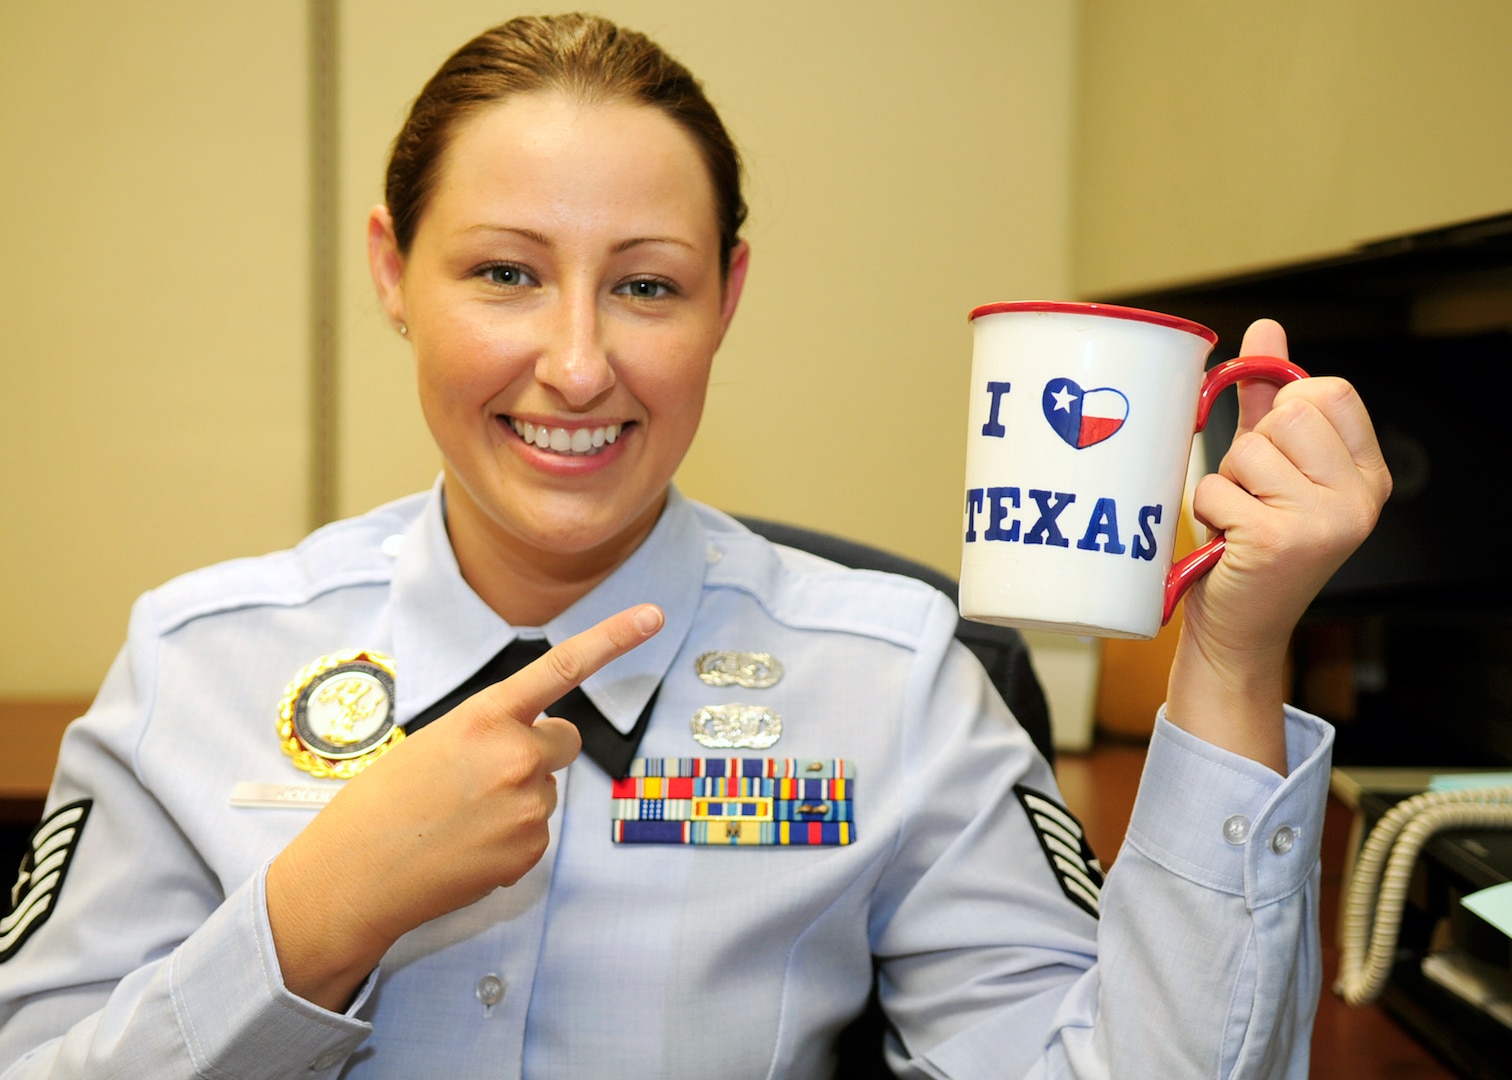 Air Force Tech. Sgt. Jennifer A. Joubert, a production recruiter with the 149th Fighter Wing at Lackland Air Force Base, Texas, was recently named the top recruiter in the Air National Guard for "Prior Service Qualified Accessions" and "Critical Accessions."